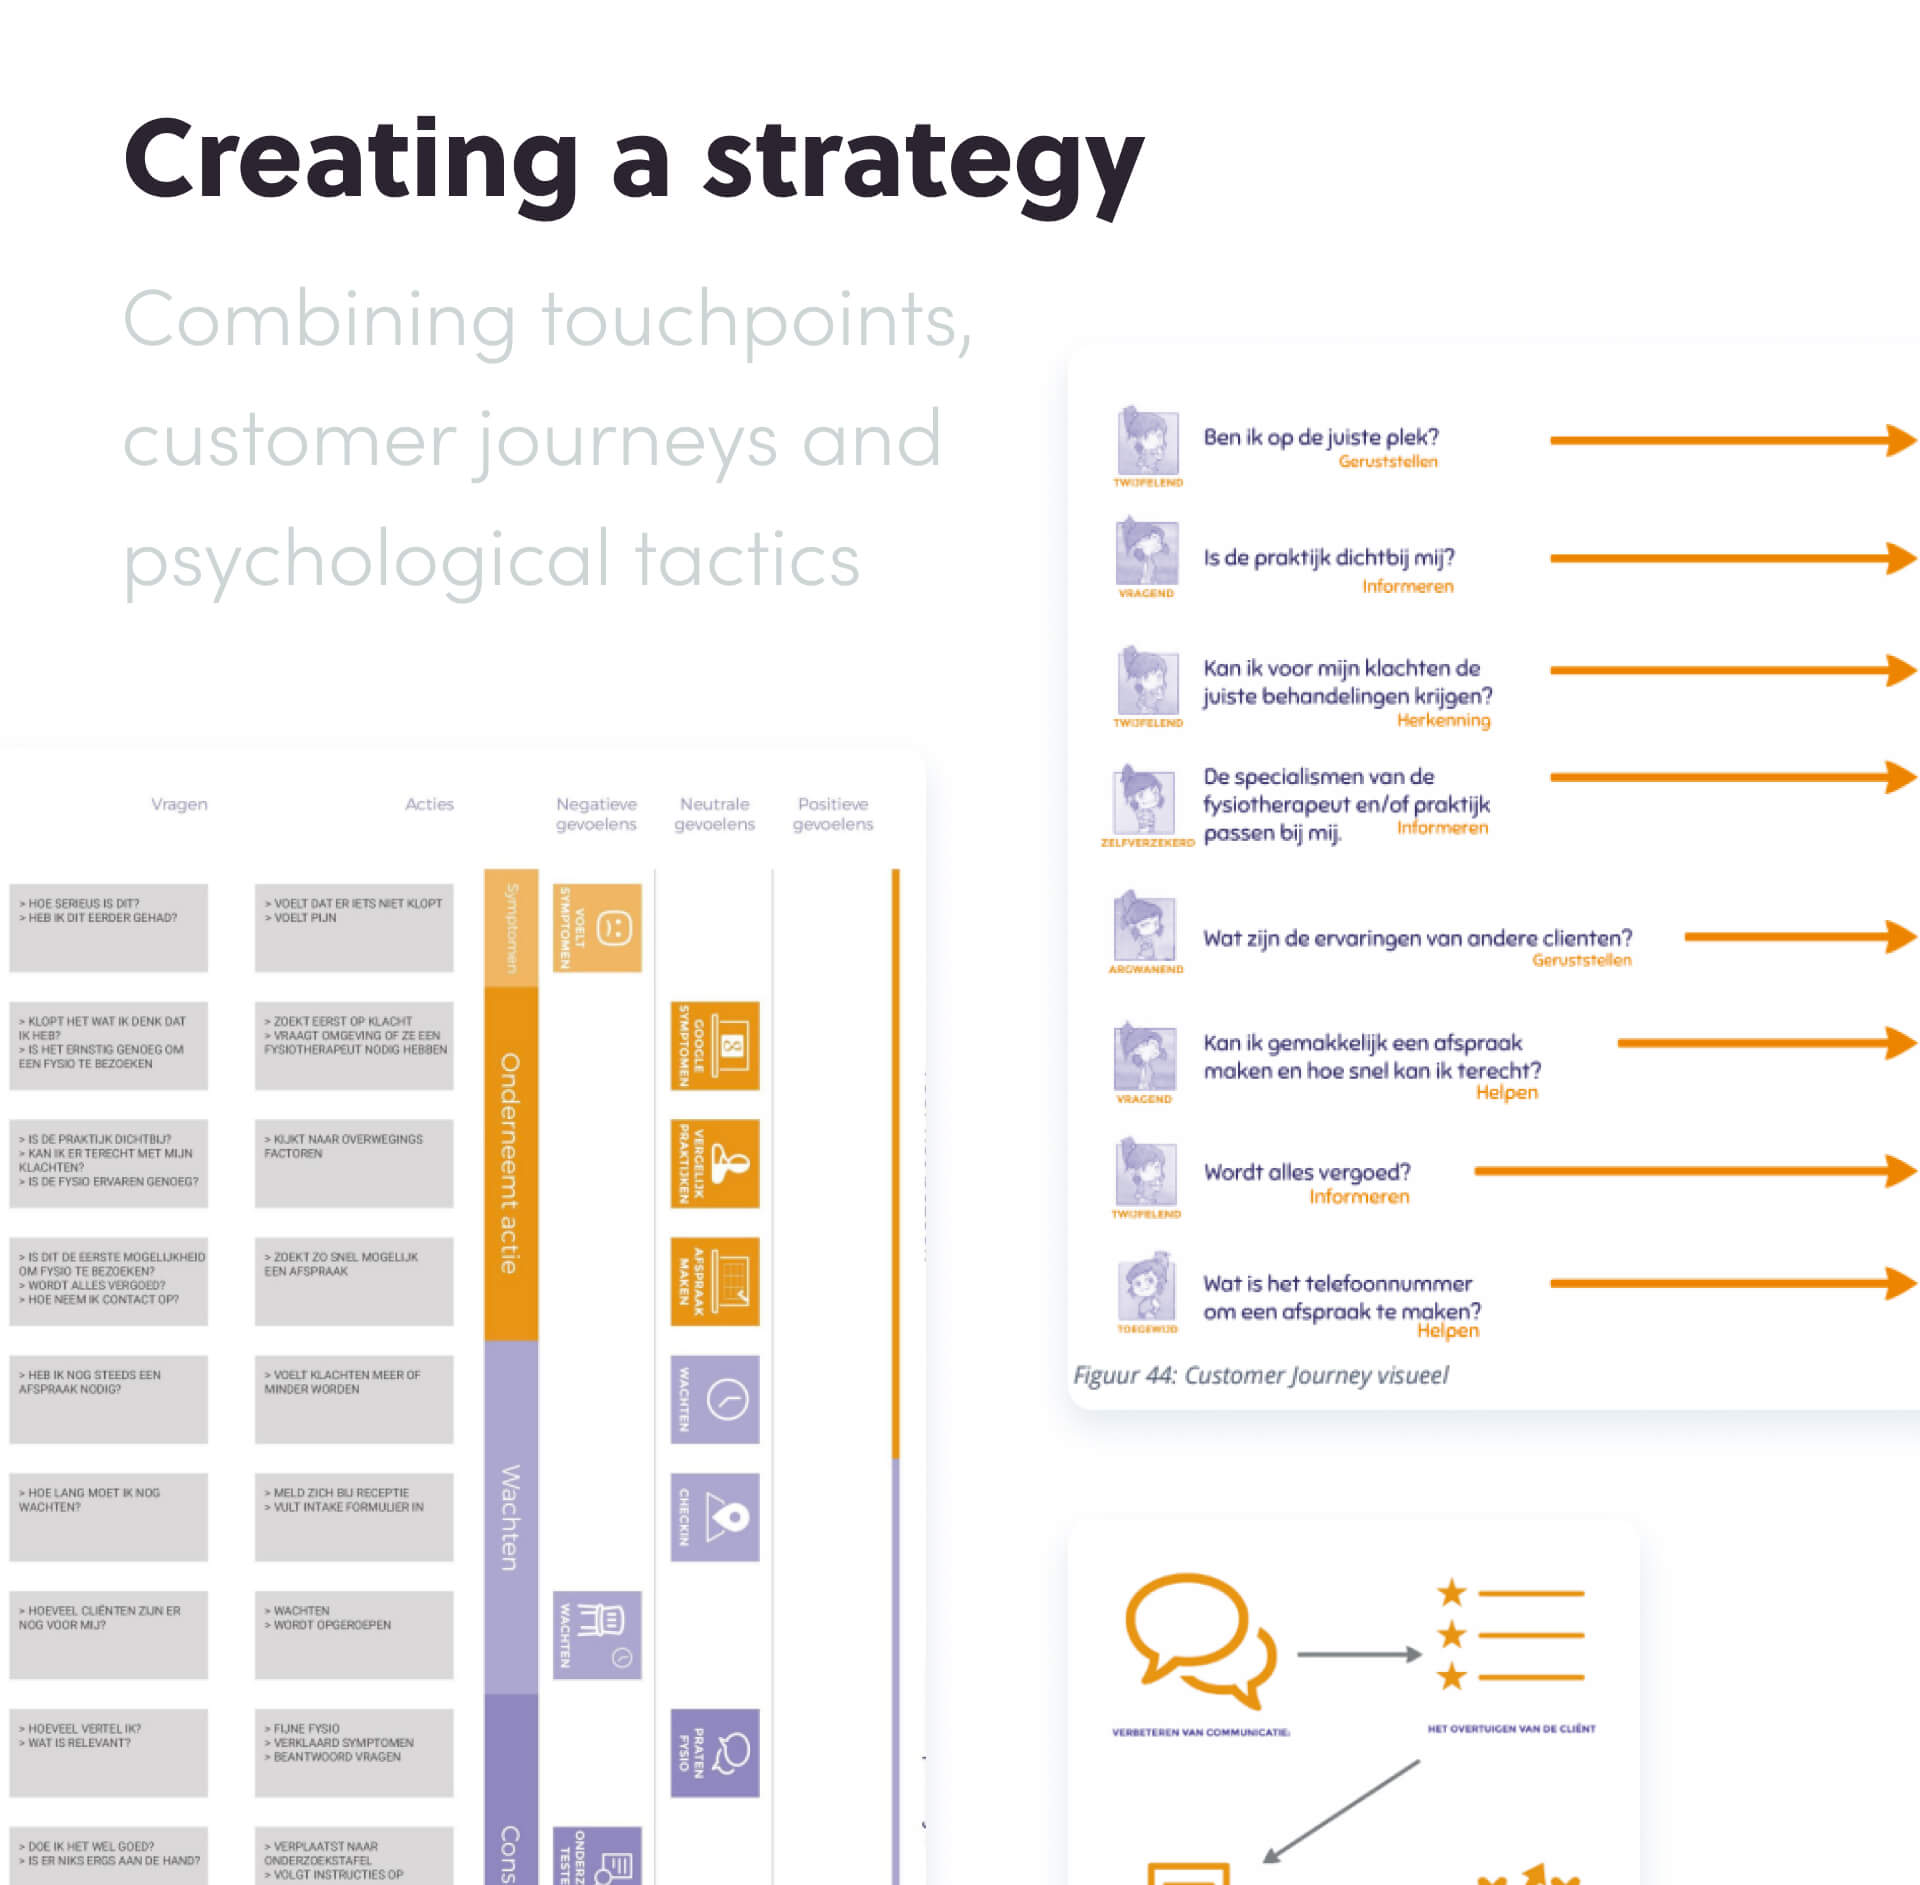 Marketing strategy presentation slides featuring touchpoints, customer journeys, and psychological tactics with text and flowcharts in orange and purple color scheme.